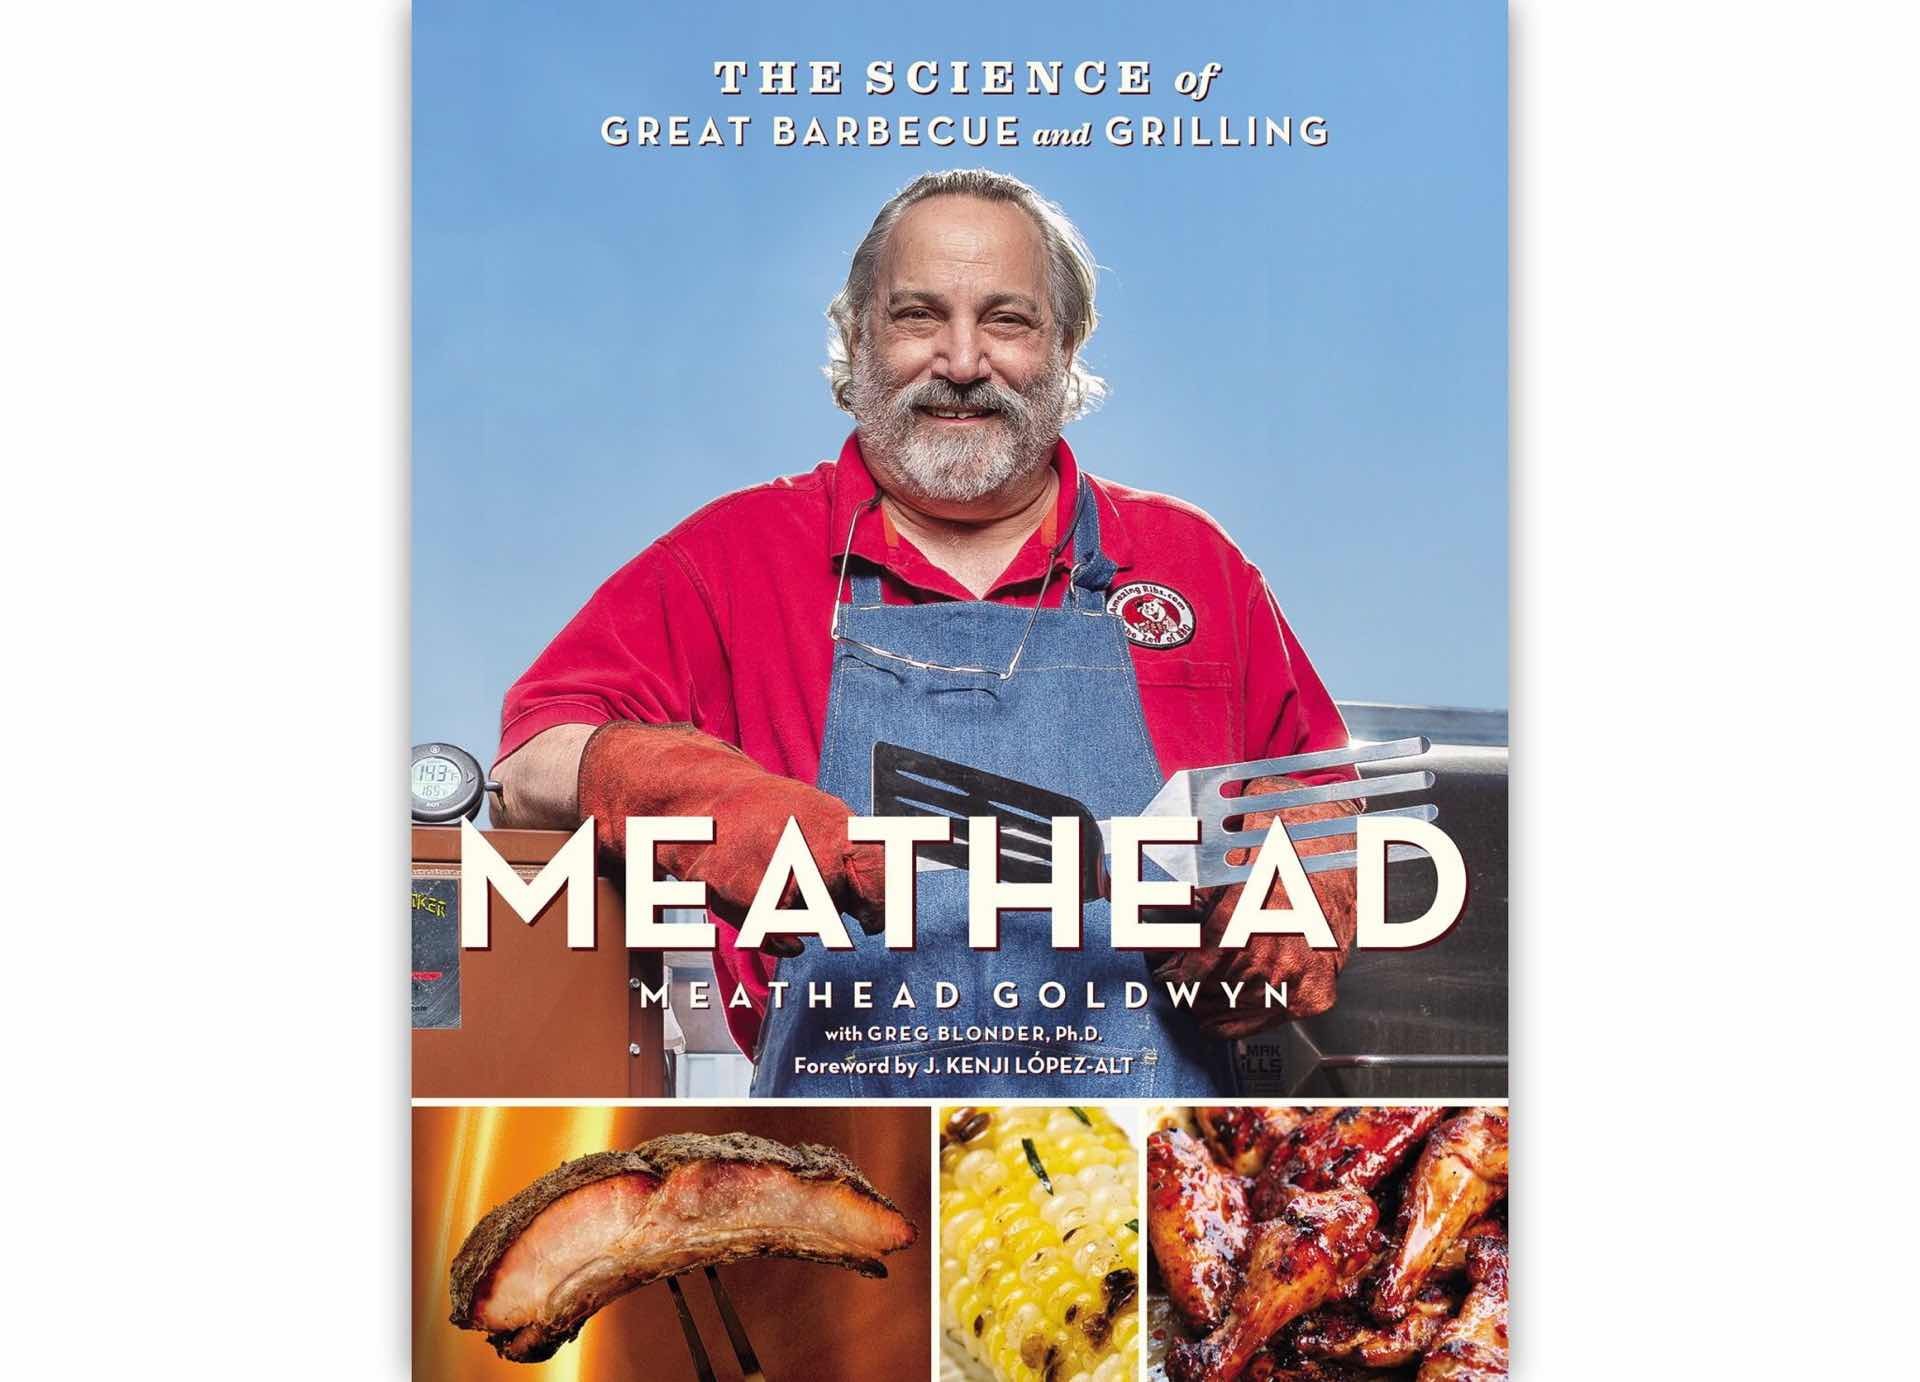 Meathead: The Science of Great Barbecue and Grilling by Meathead Goldwyn.